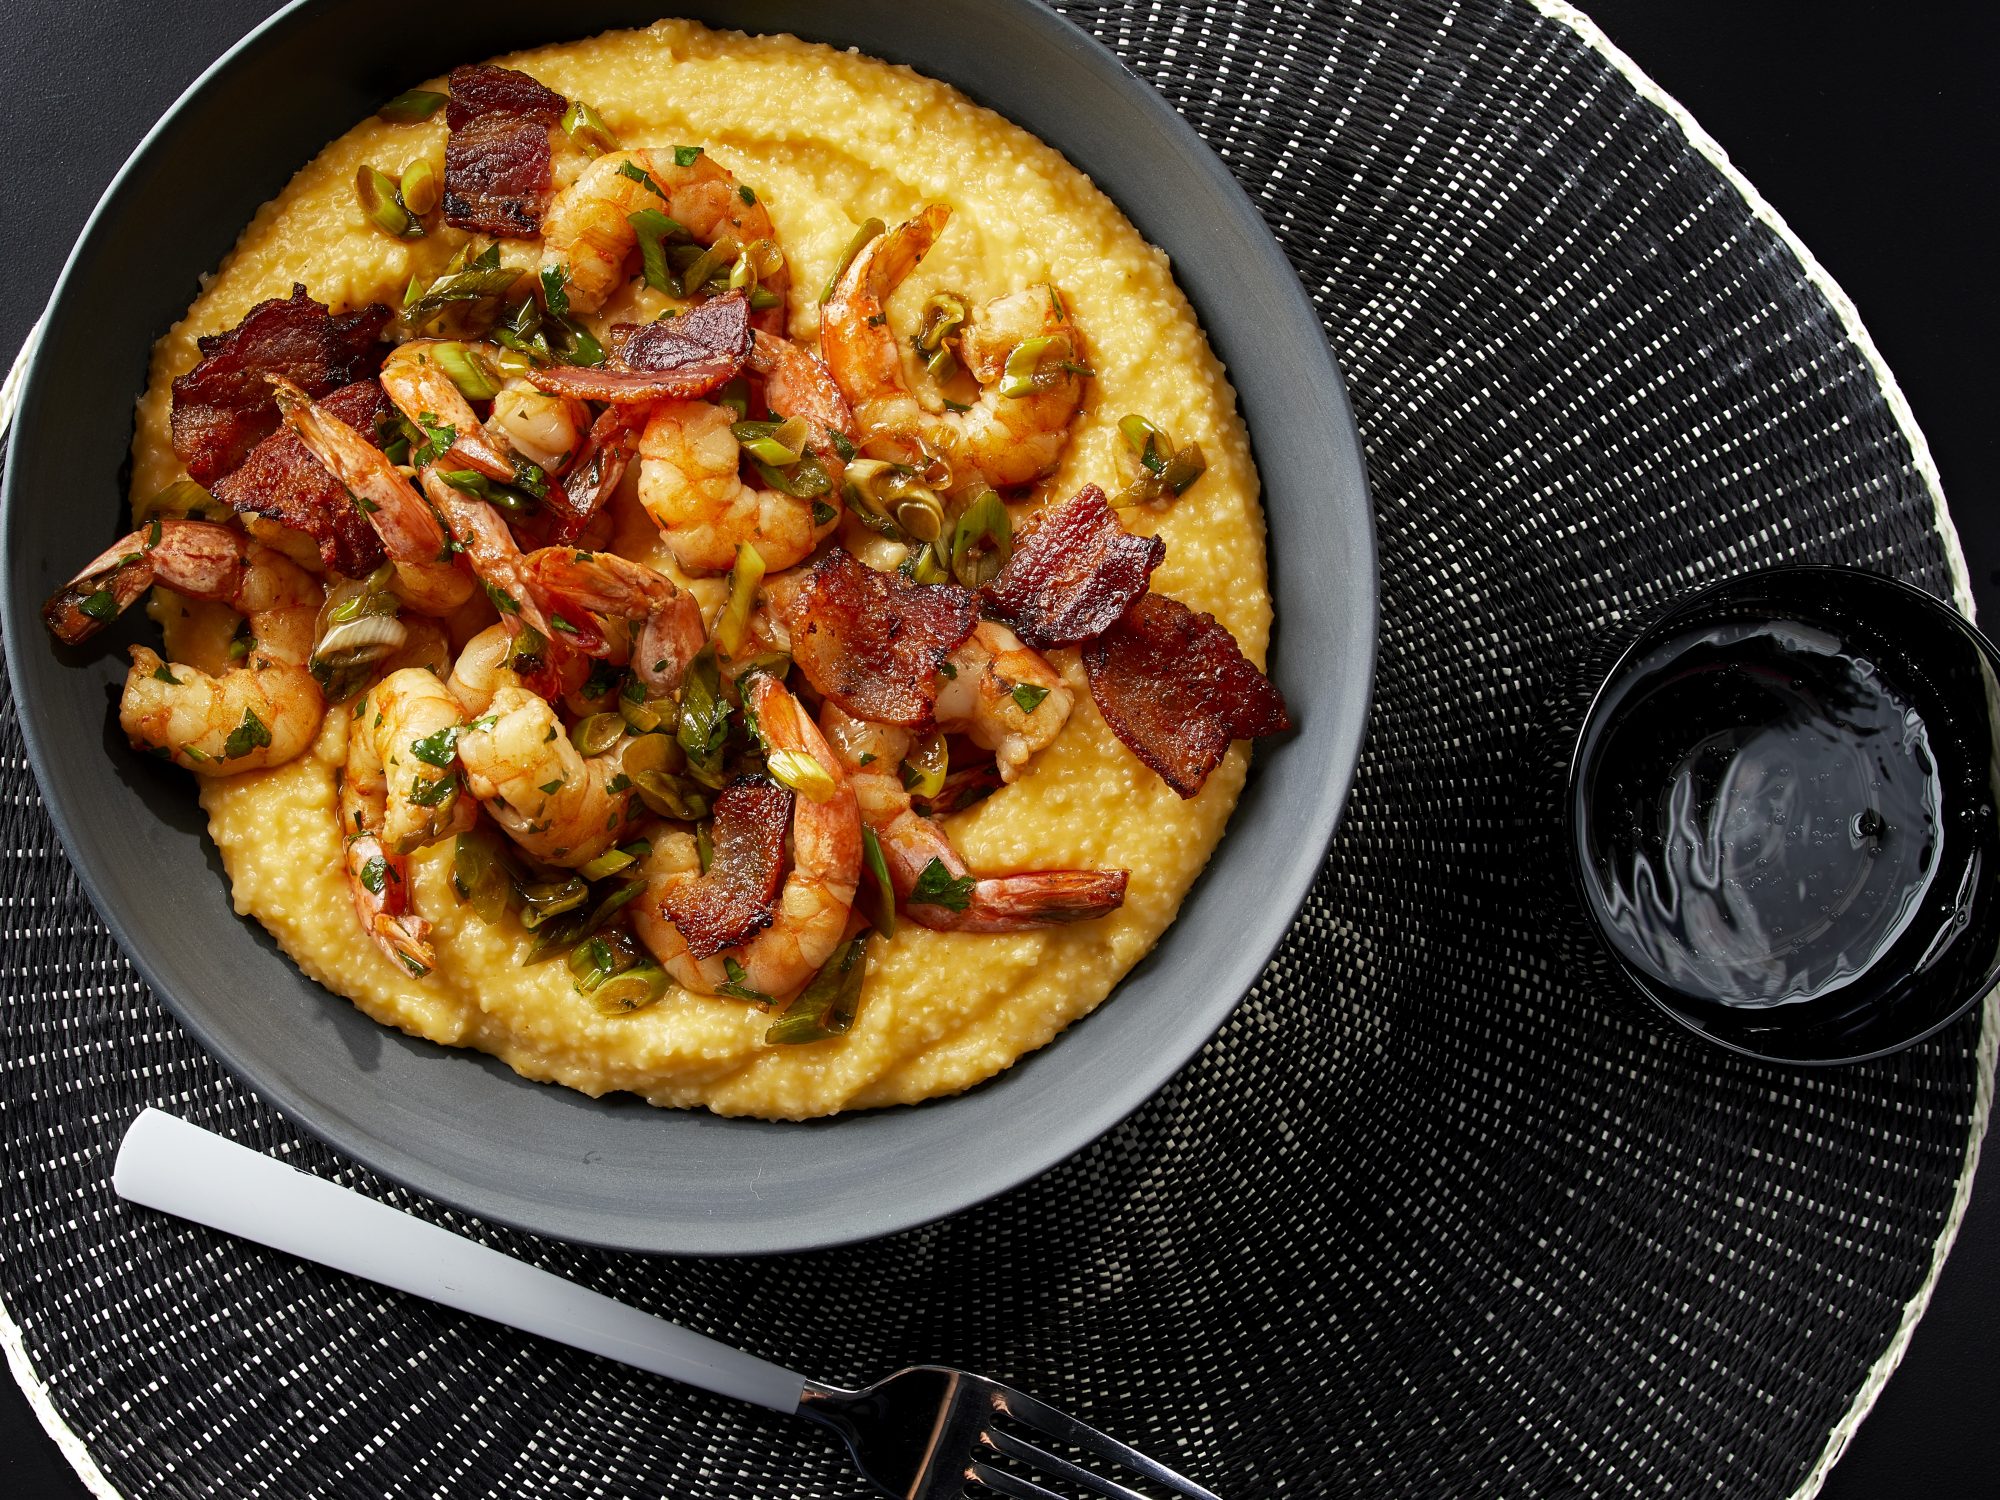 #20: Cheesy Shrimp and Grits